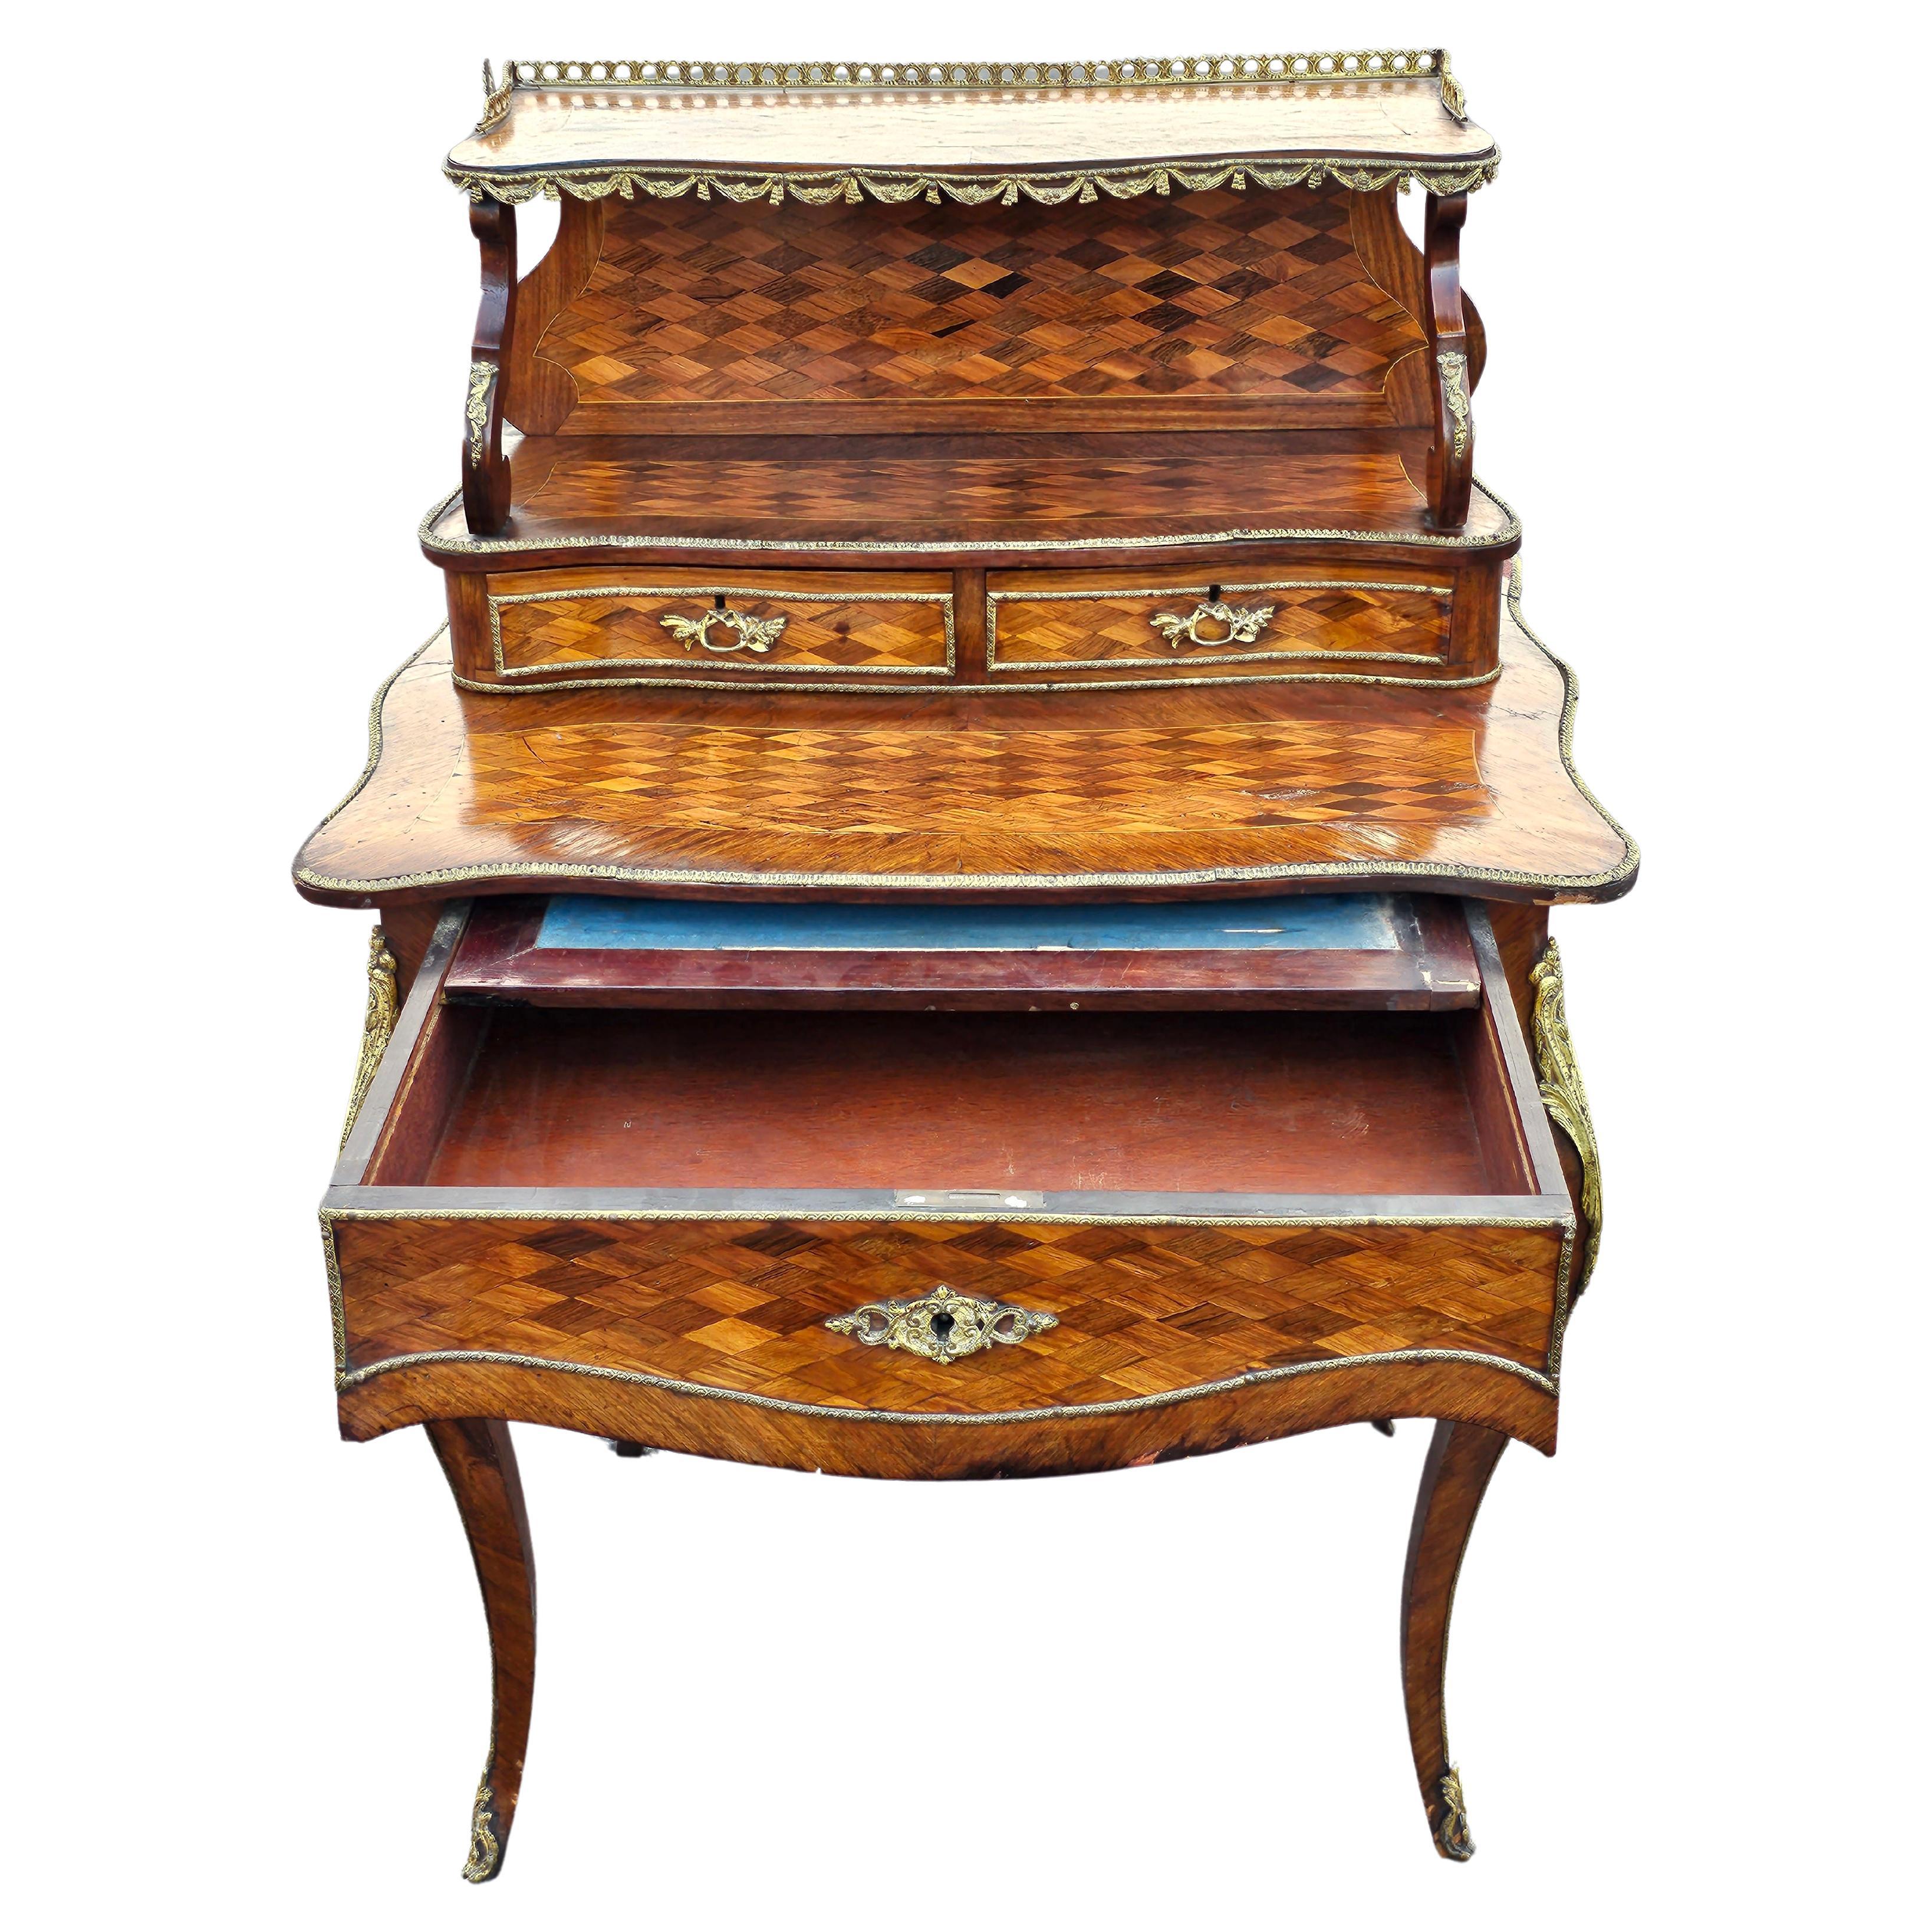 19th C. Louis XV Style Kingwood Marquetry & Ormolu Bonheur Du Jour Writing Desk In Good Condition For Sale In Germantown, MD